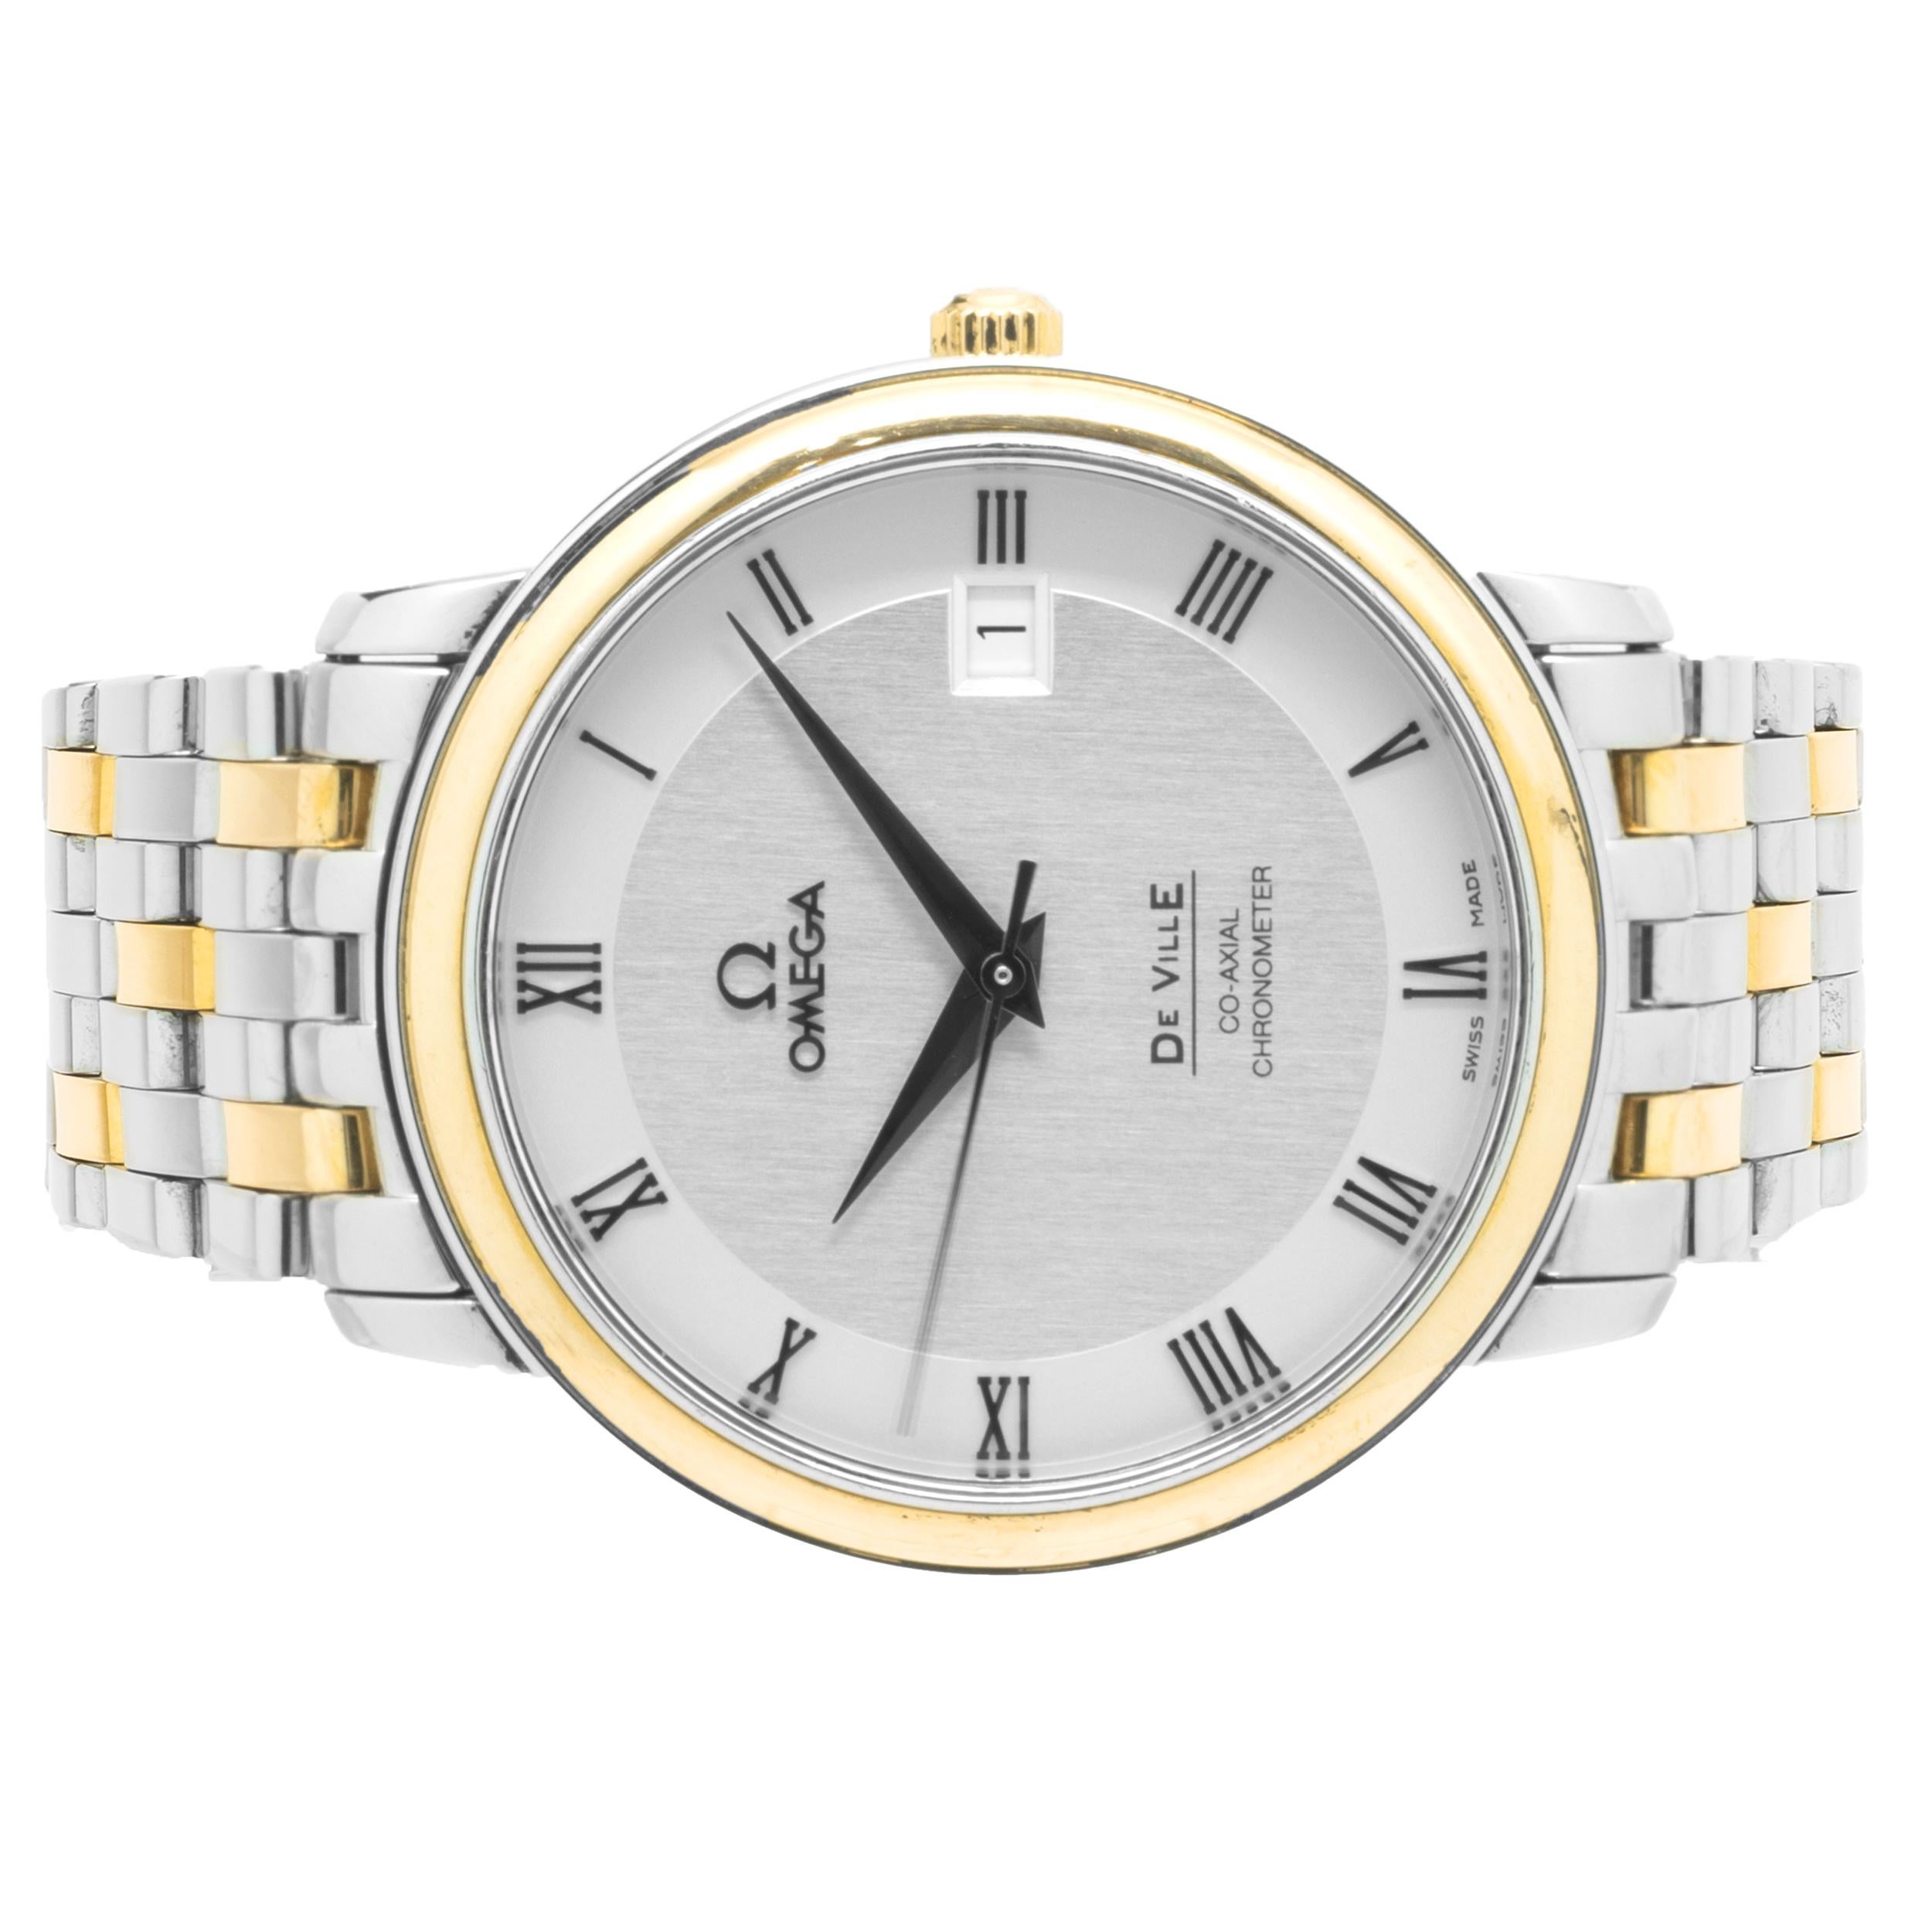 Brand: Omega
Movement: automatic
Function: hour, minutes, seconds, date
Case: 36.5mm stainless steel round case, 18K yellow gold smooth bezel, sapphire crystal, screw down crown
Band: stainless steel & 18K yellow gold bracelet
Dial: silver roman